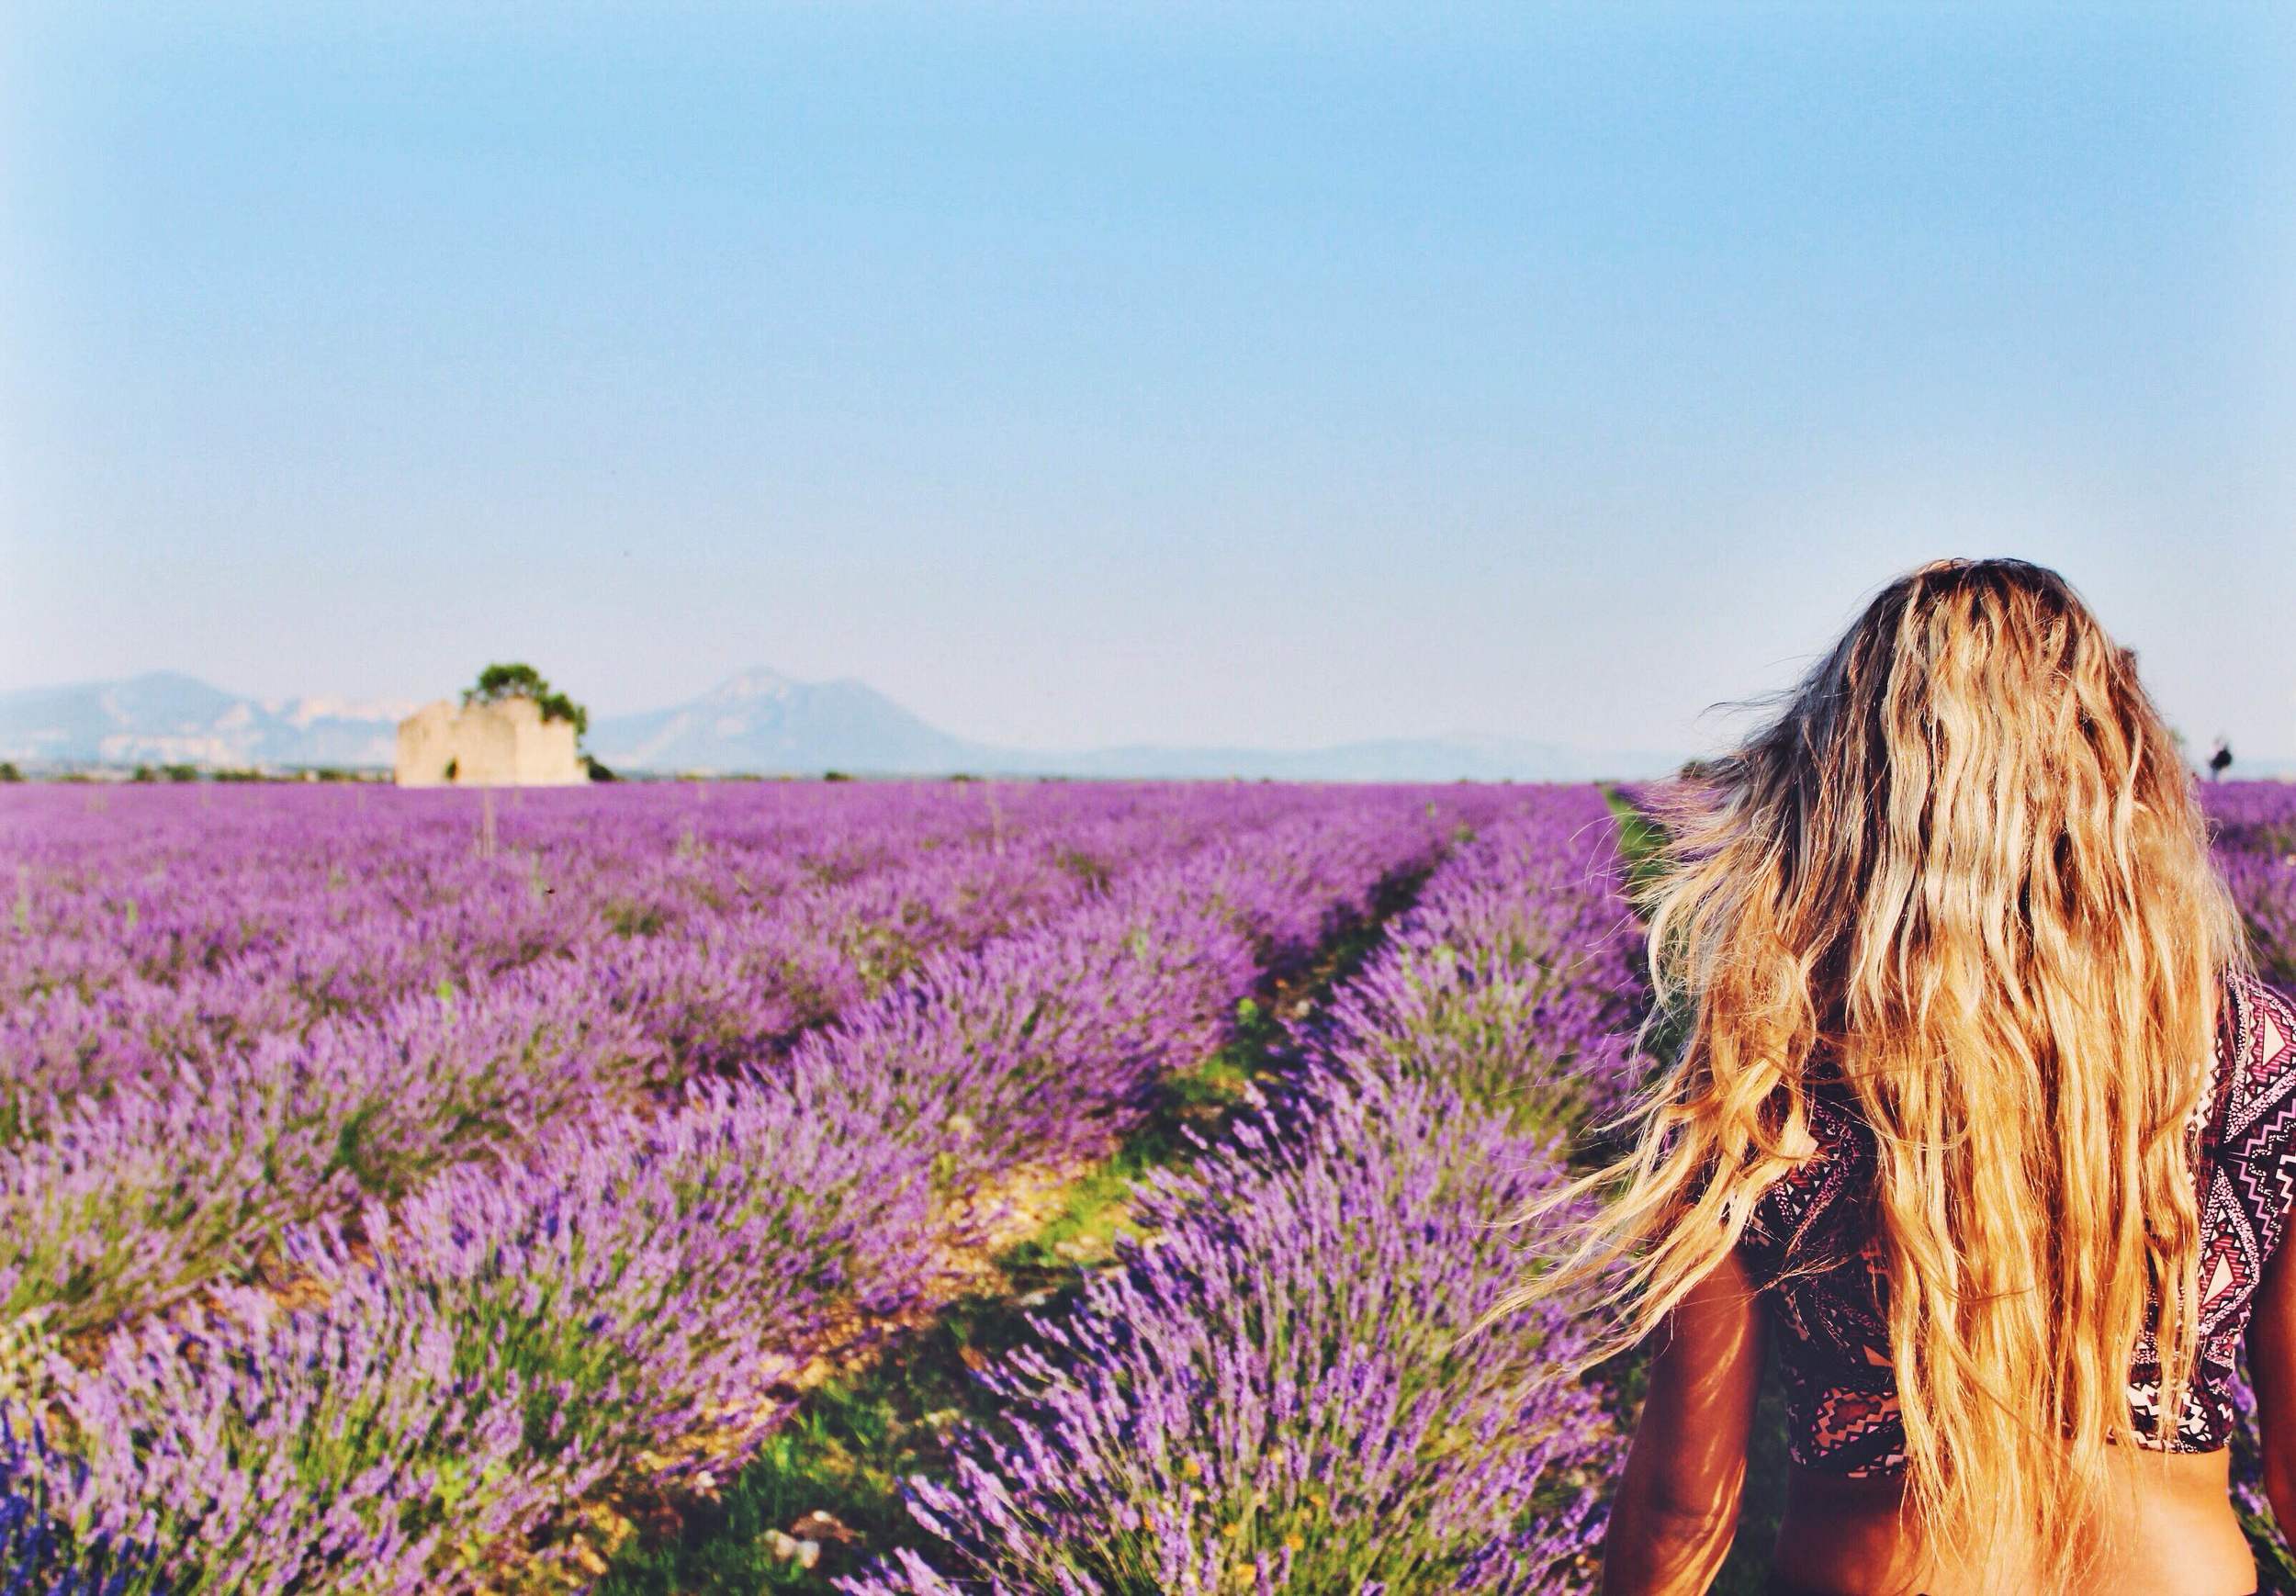 Blond Girl Walking in the Lavender Fields - Valensole - Provence - French Riviera - South of France